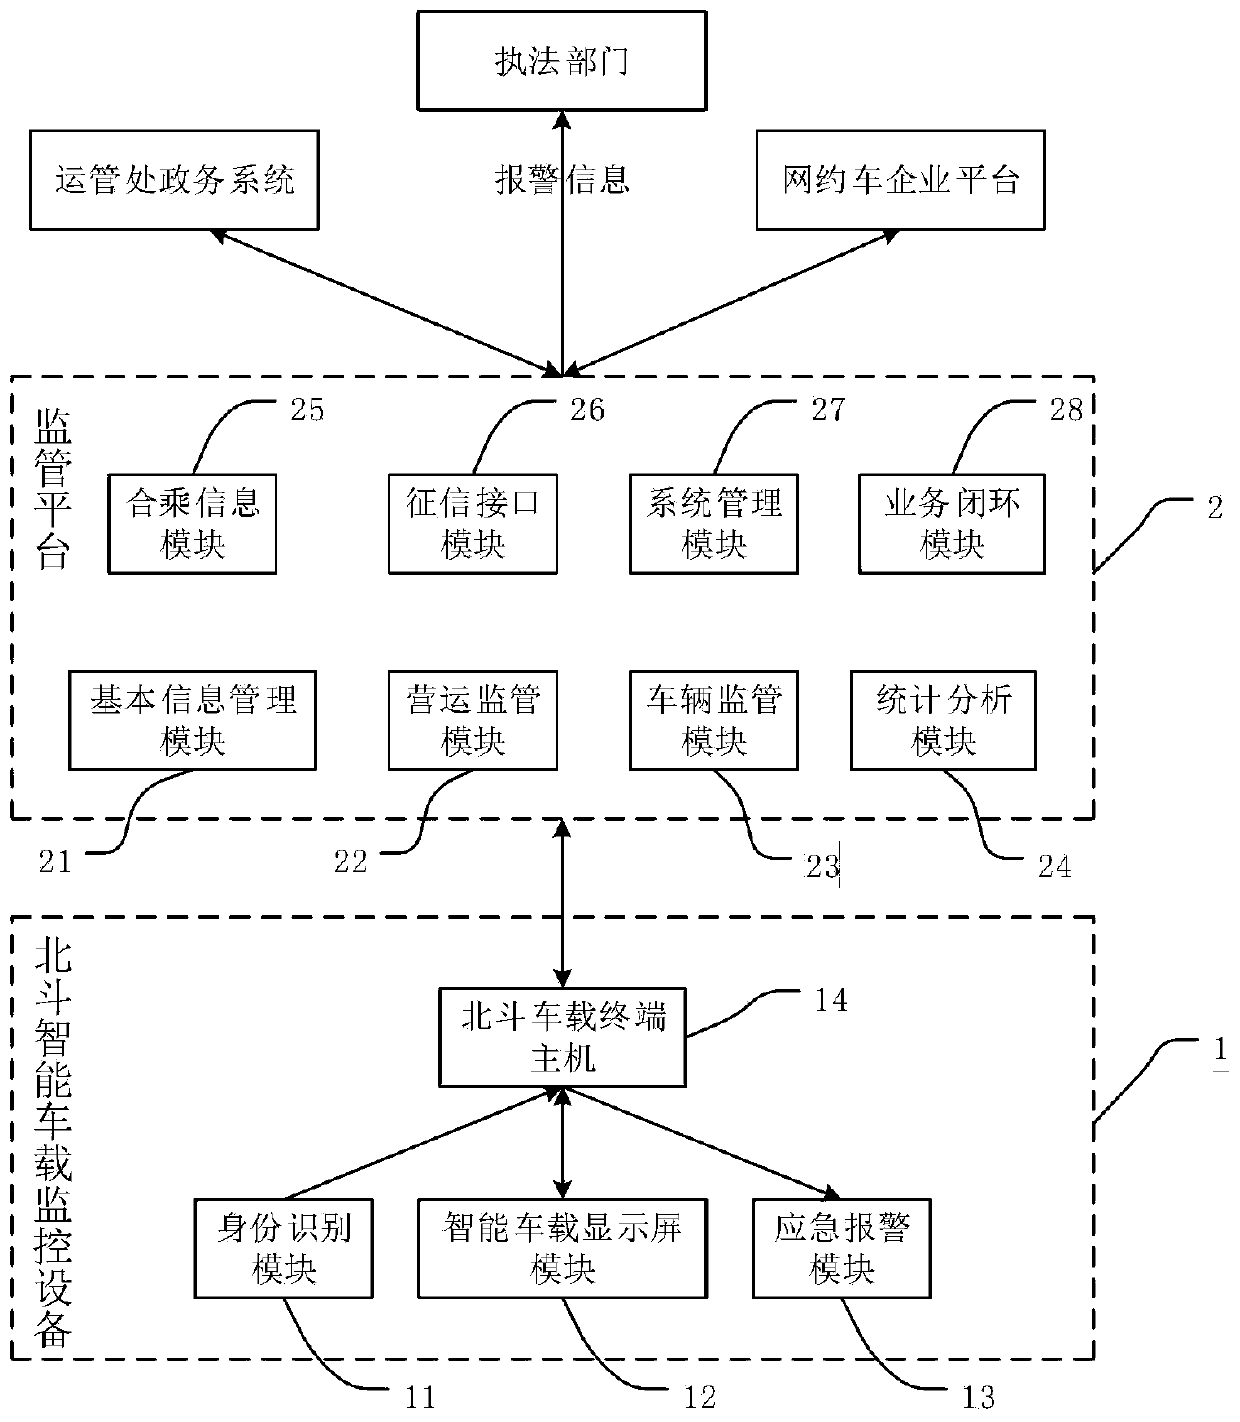 Beidou-based online car-hailing information interaction and supervision system